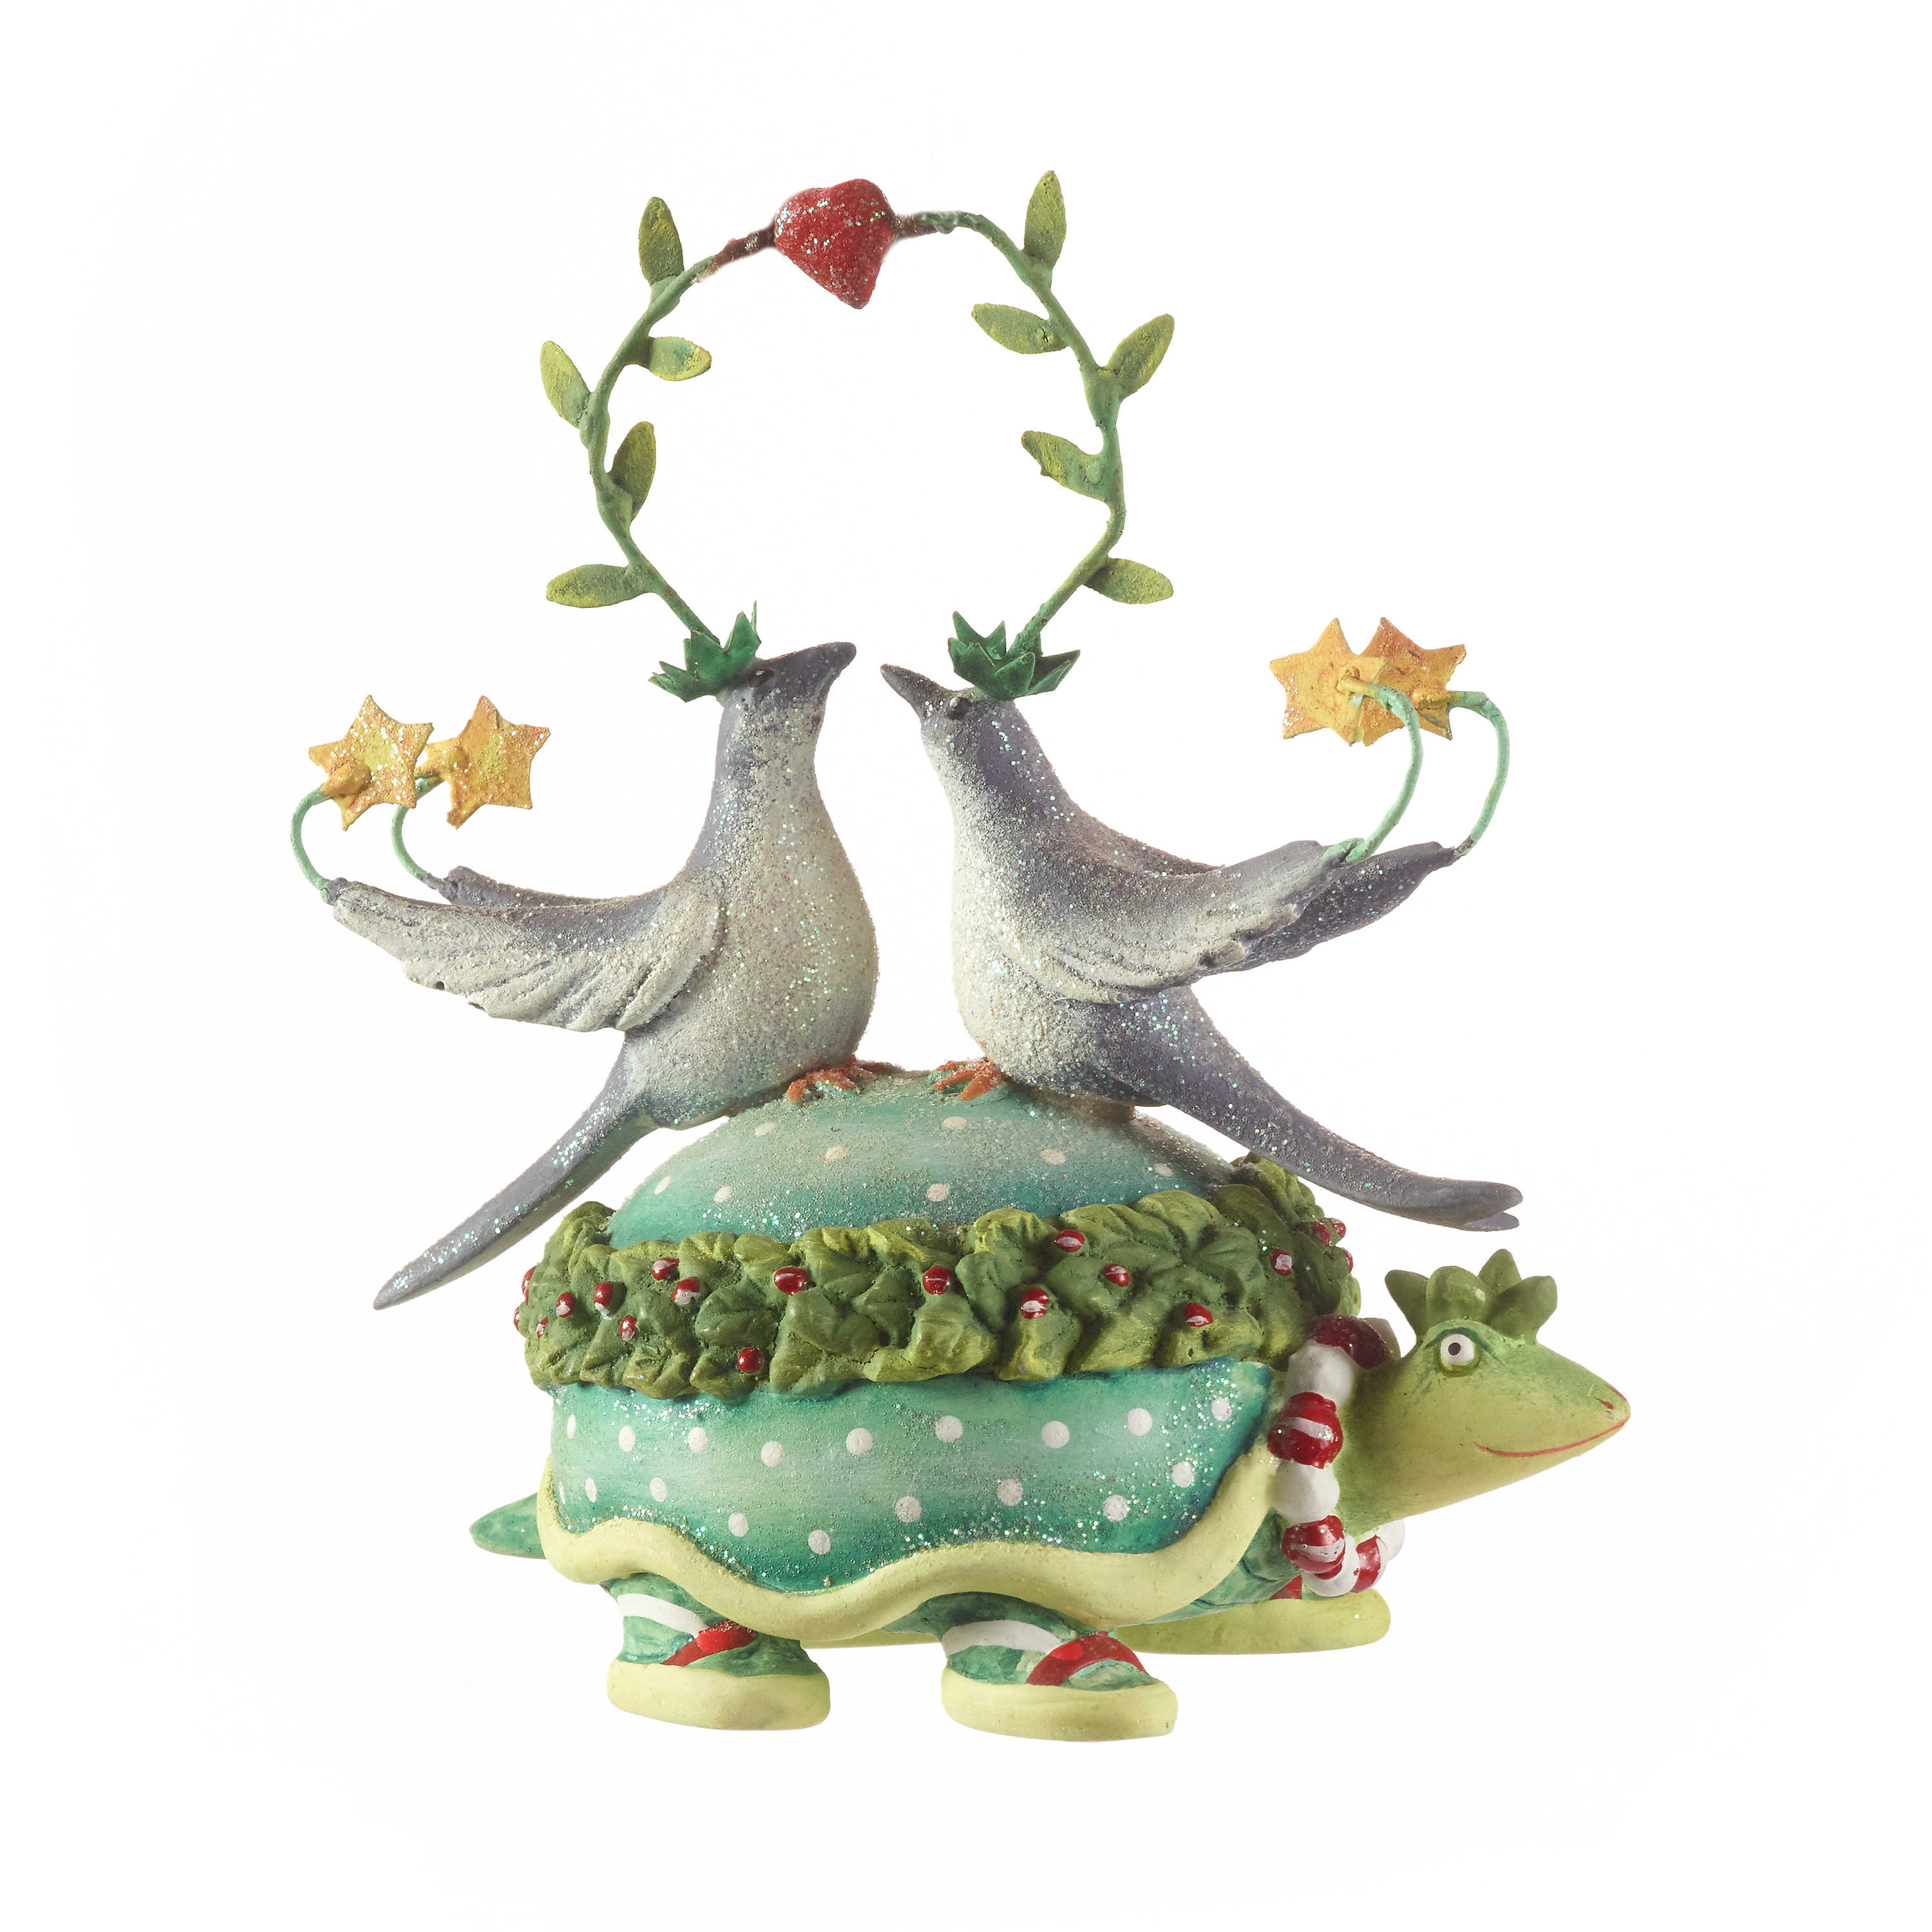 Patience Brewster 12 Days 2 Turtle Doves Ornament mackenzie-childs Panama 0